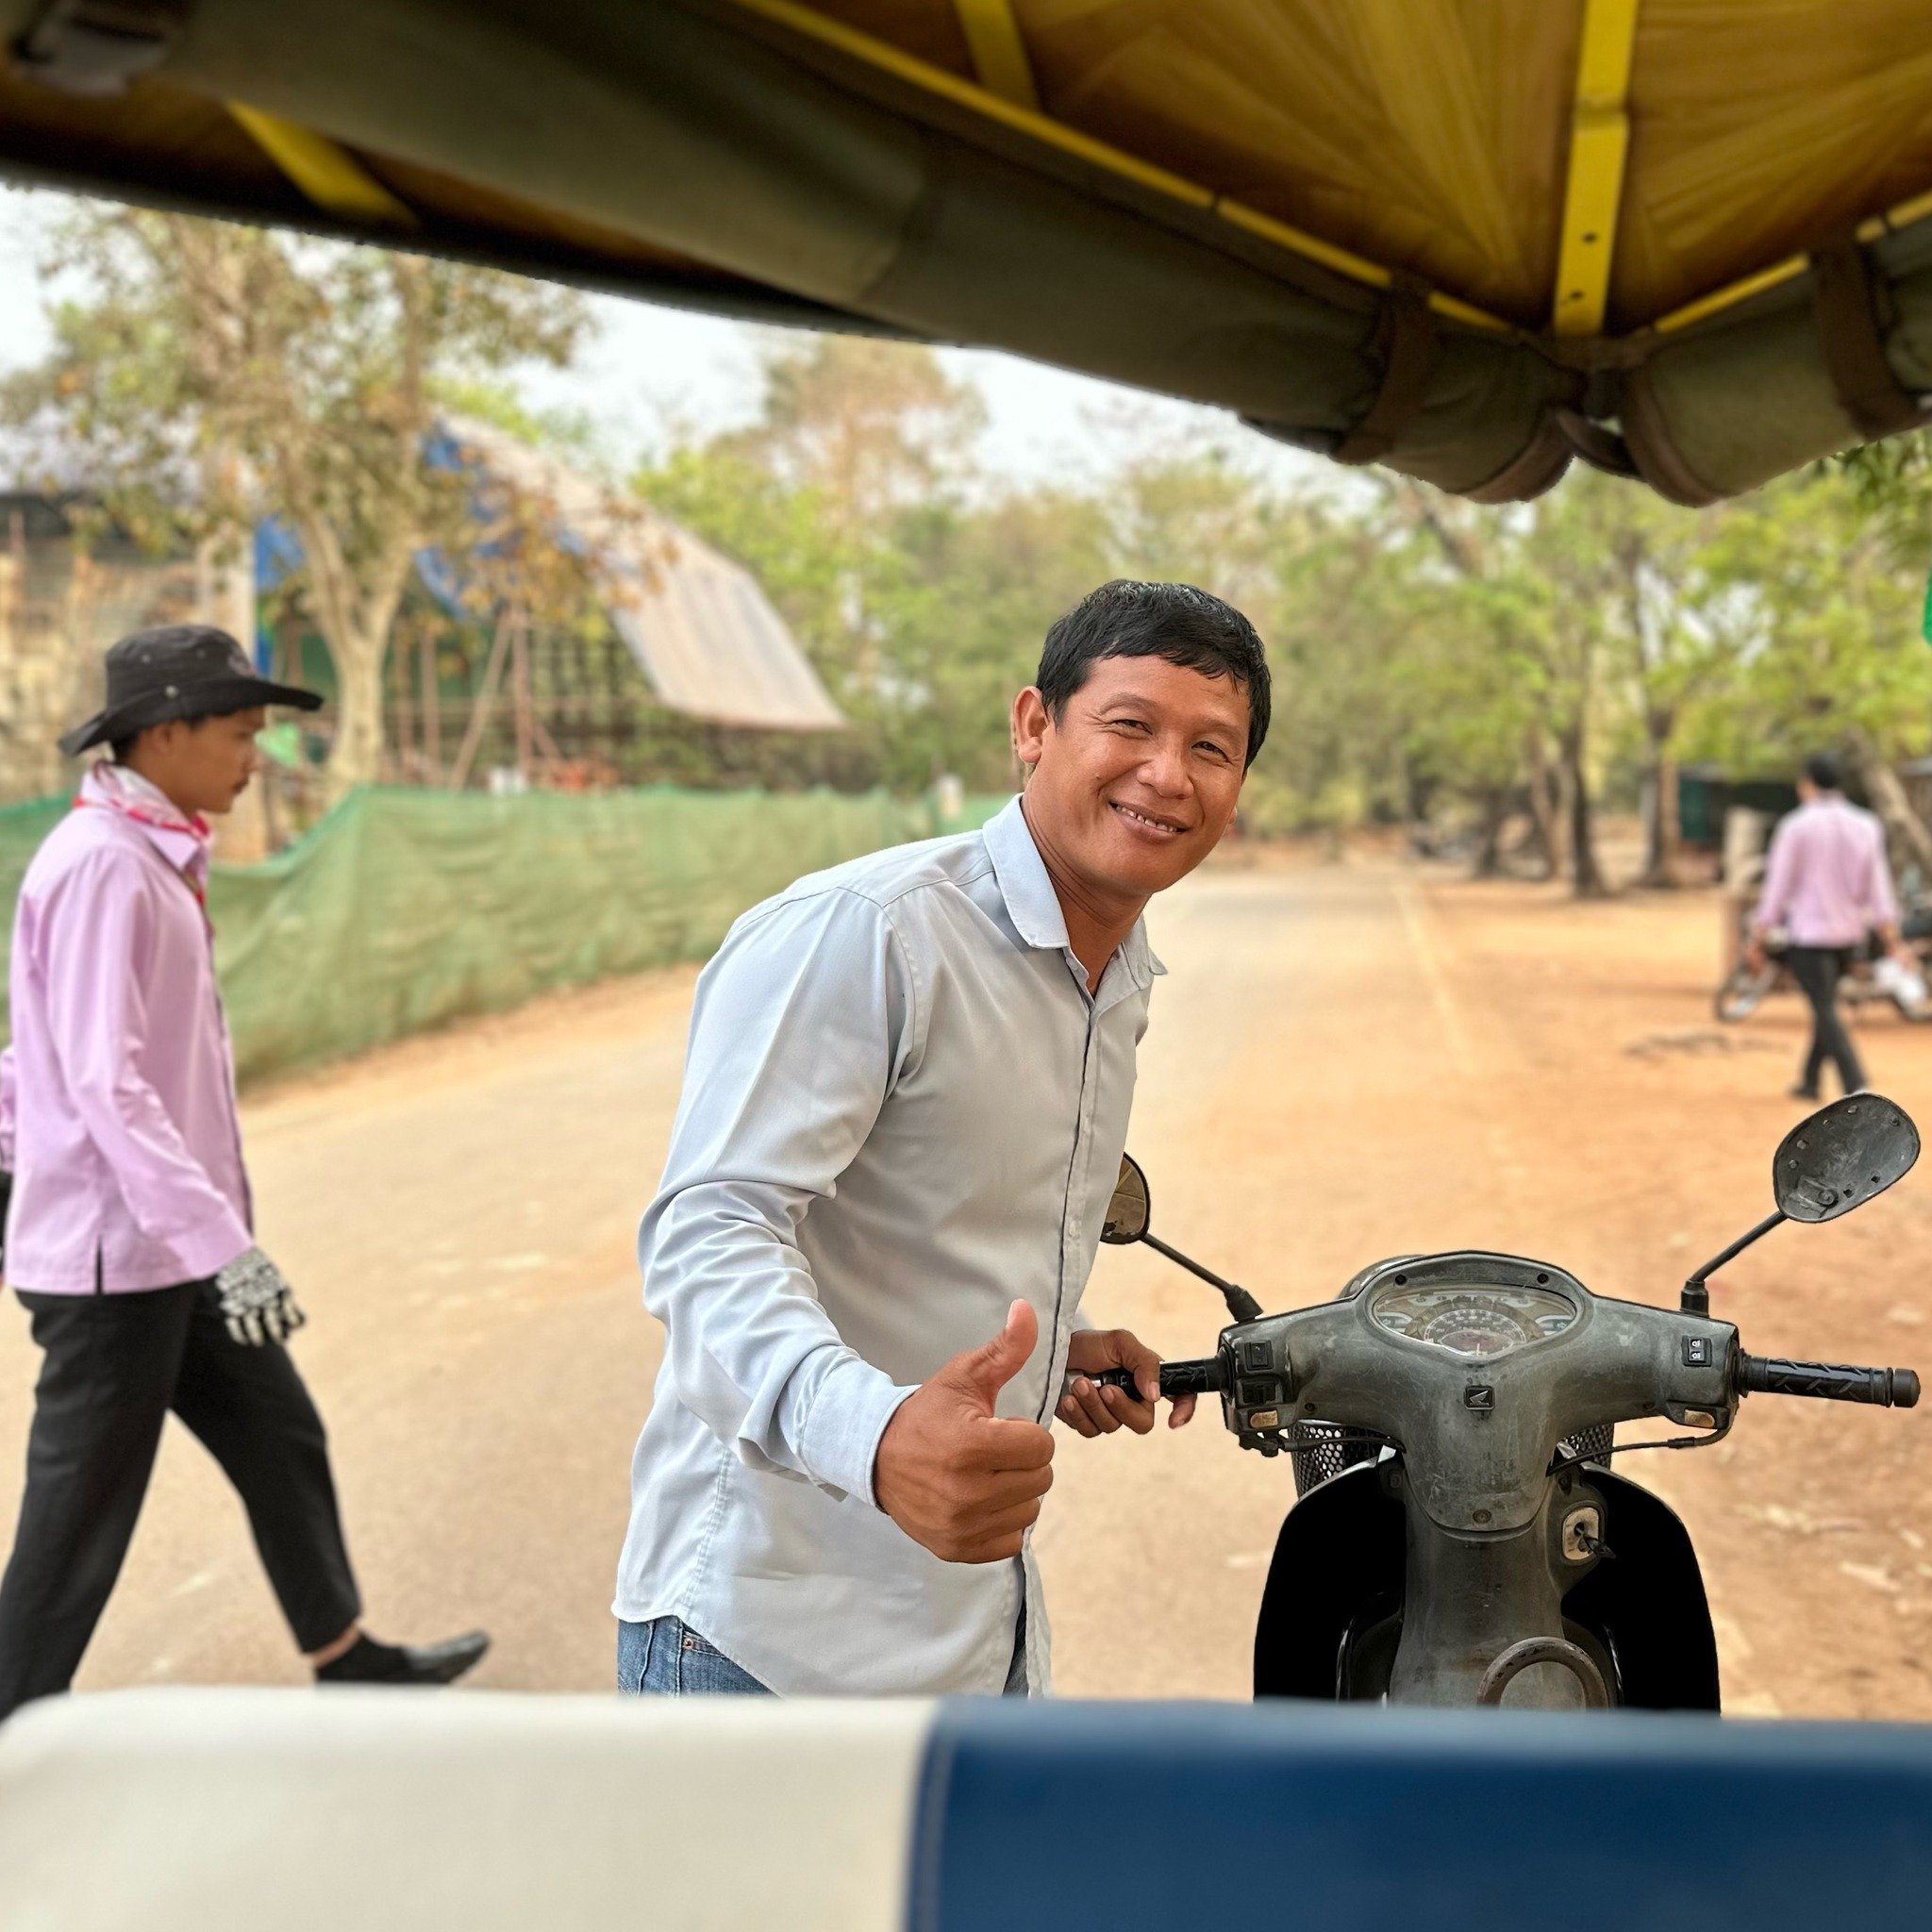 Thank you for all customers choosing me for tuk tuk driver touring in Siem Reap. I&rsquo;m very happy to share my culture and why I&rsquo;m always learning my English.  tuktukroben@gmail.com for bookings #angkorwat #siemreap #angkorwattuktuk